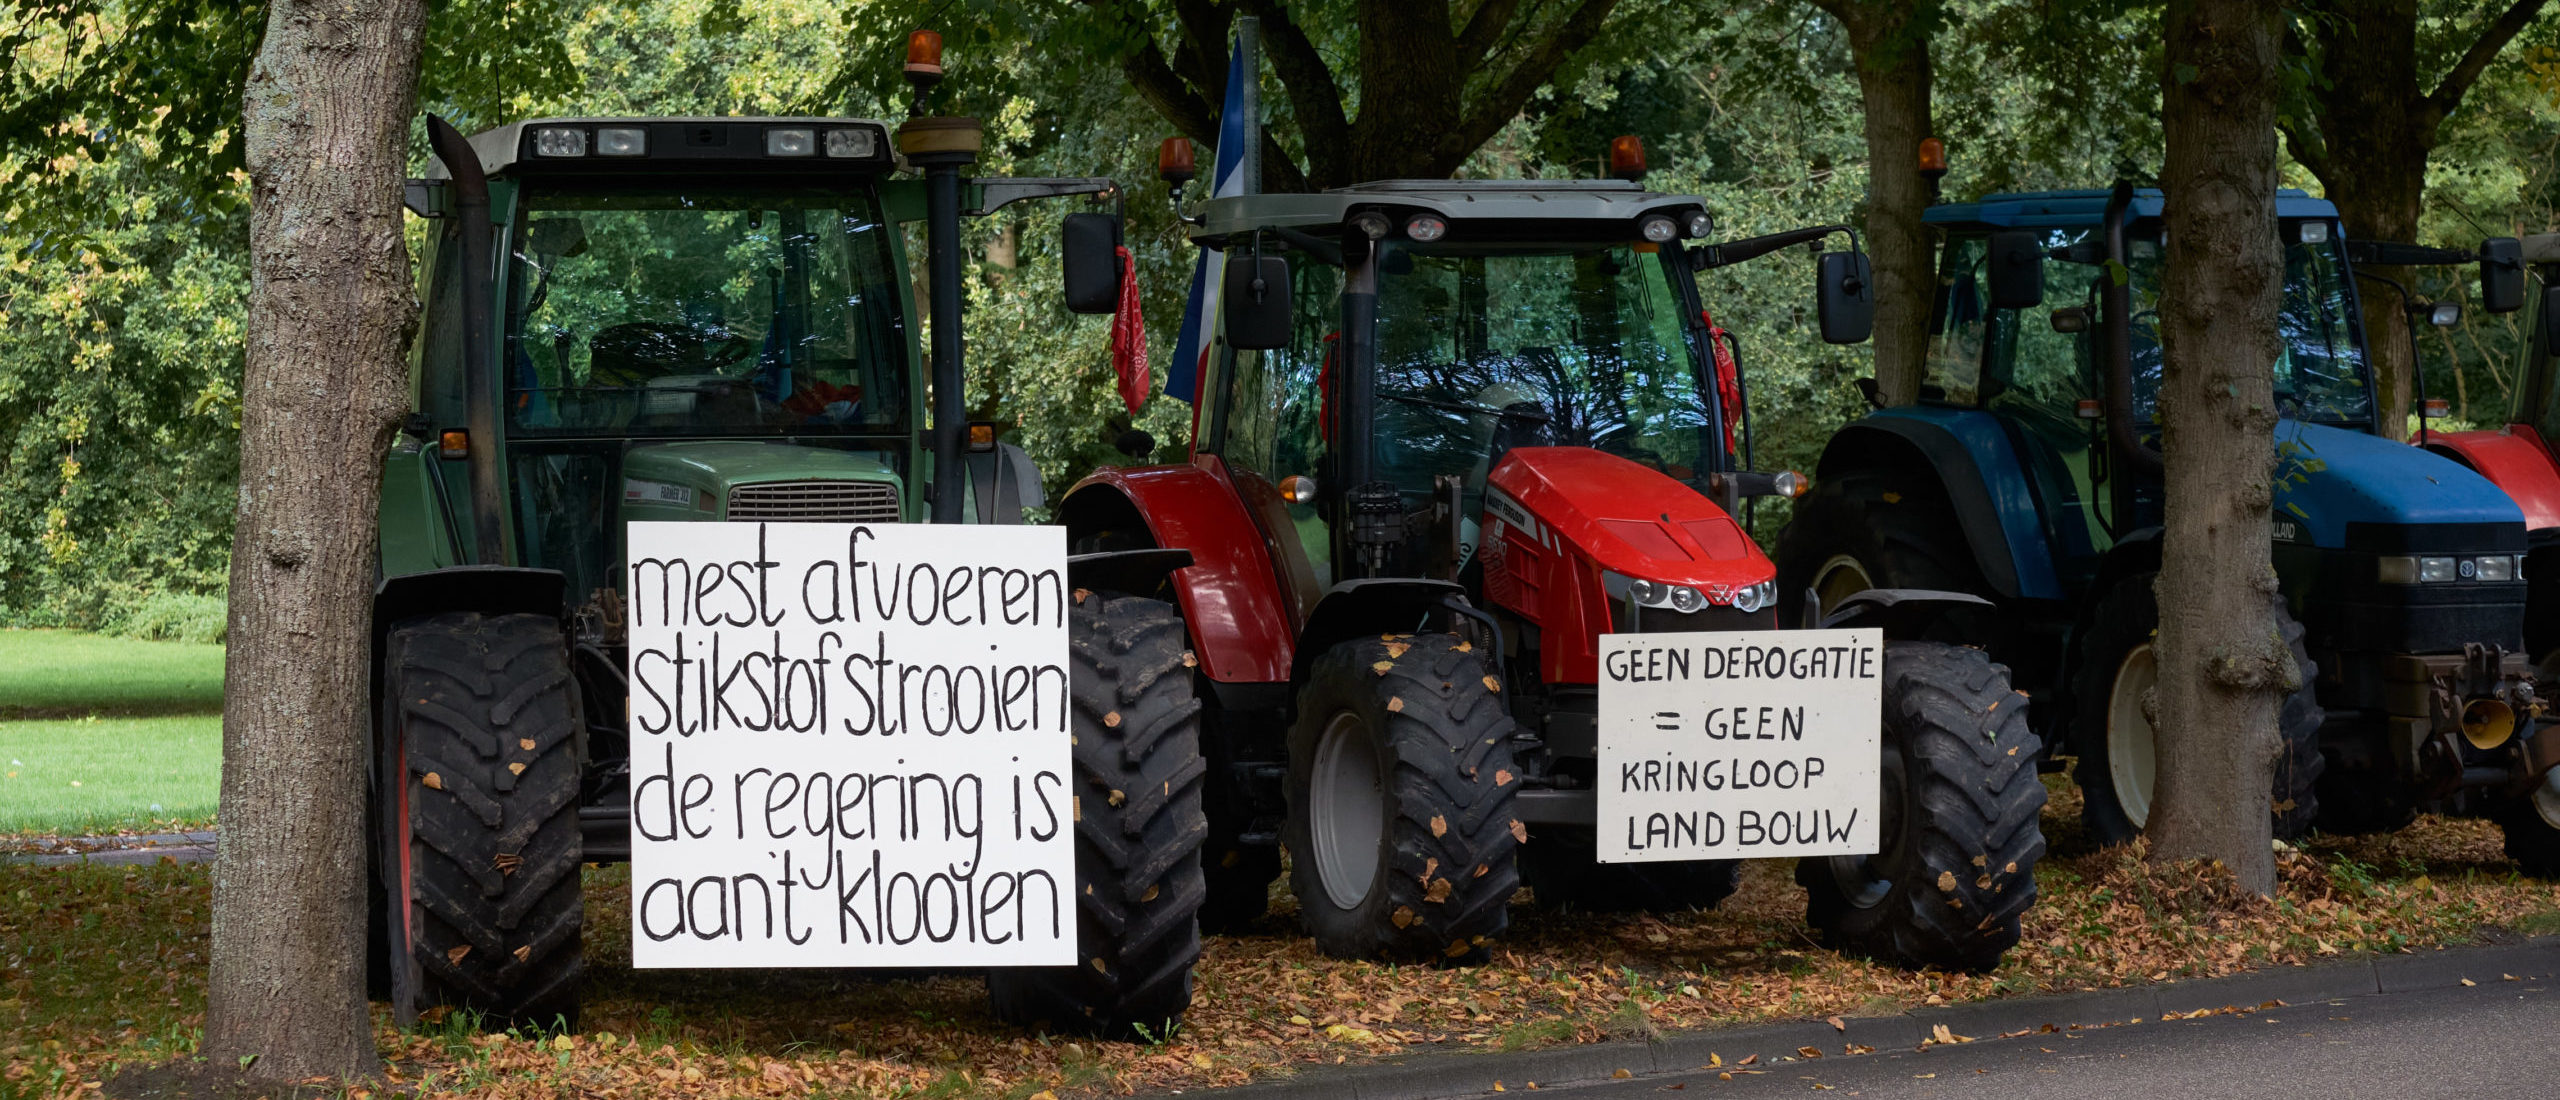 Dutch Government To Seize And Close 3,000 Farms To Comply With EU Environmental Rules